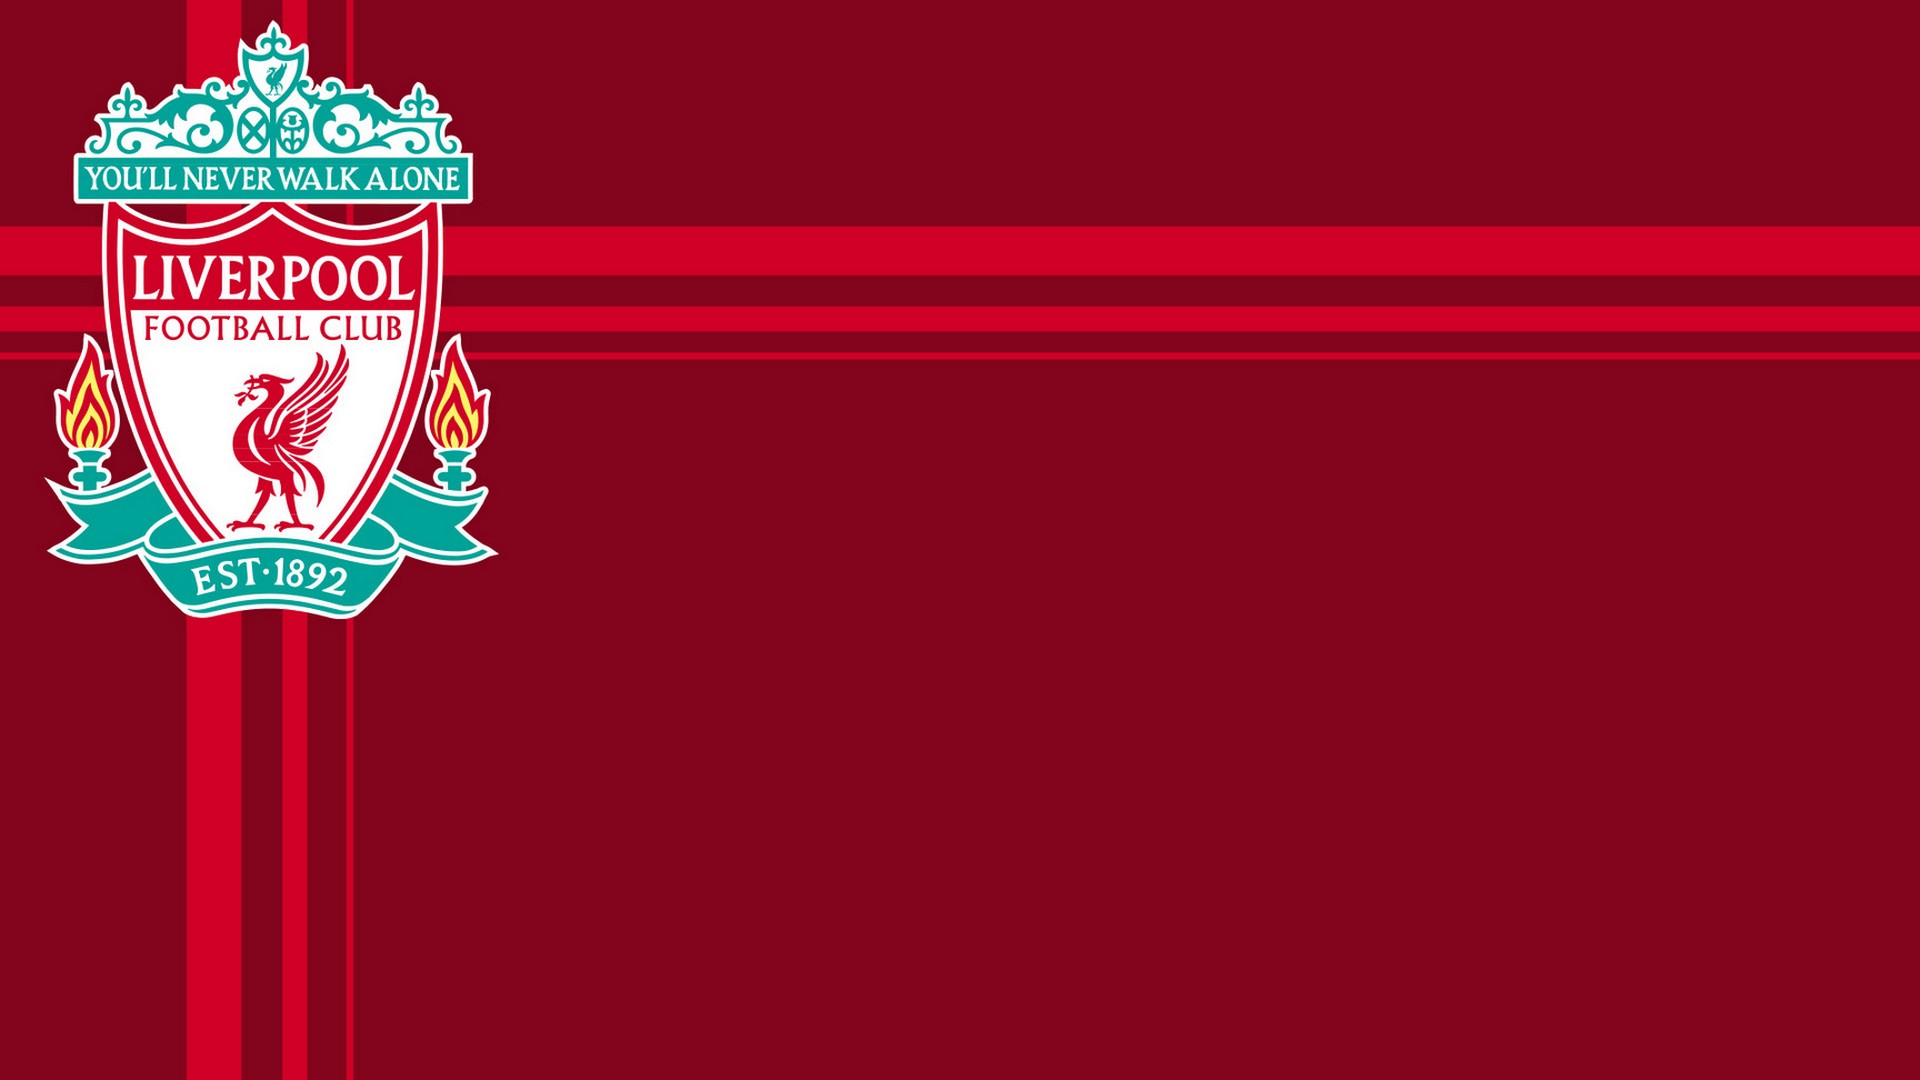 Wallpaper Desktop Liverpool HD With Resolution 1920X1080 pixel. You can make this wallpaper for your Mac or Windows Desktop Background, iPhone, Android or Tablet and another Smartphone device for free